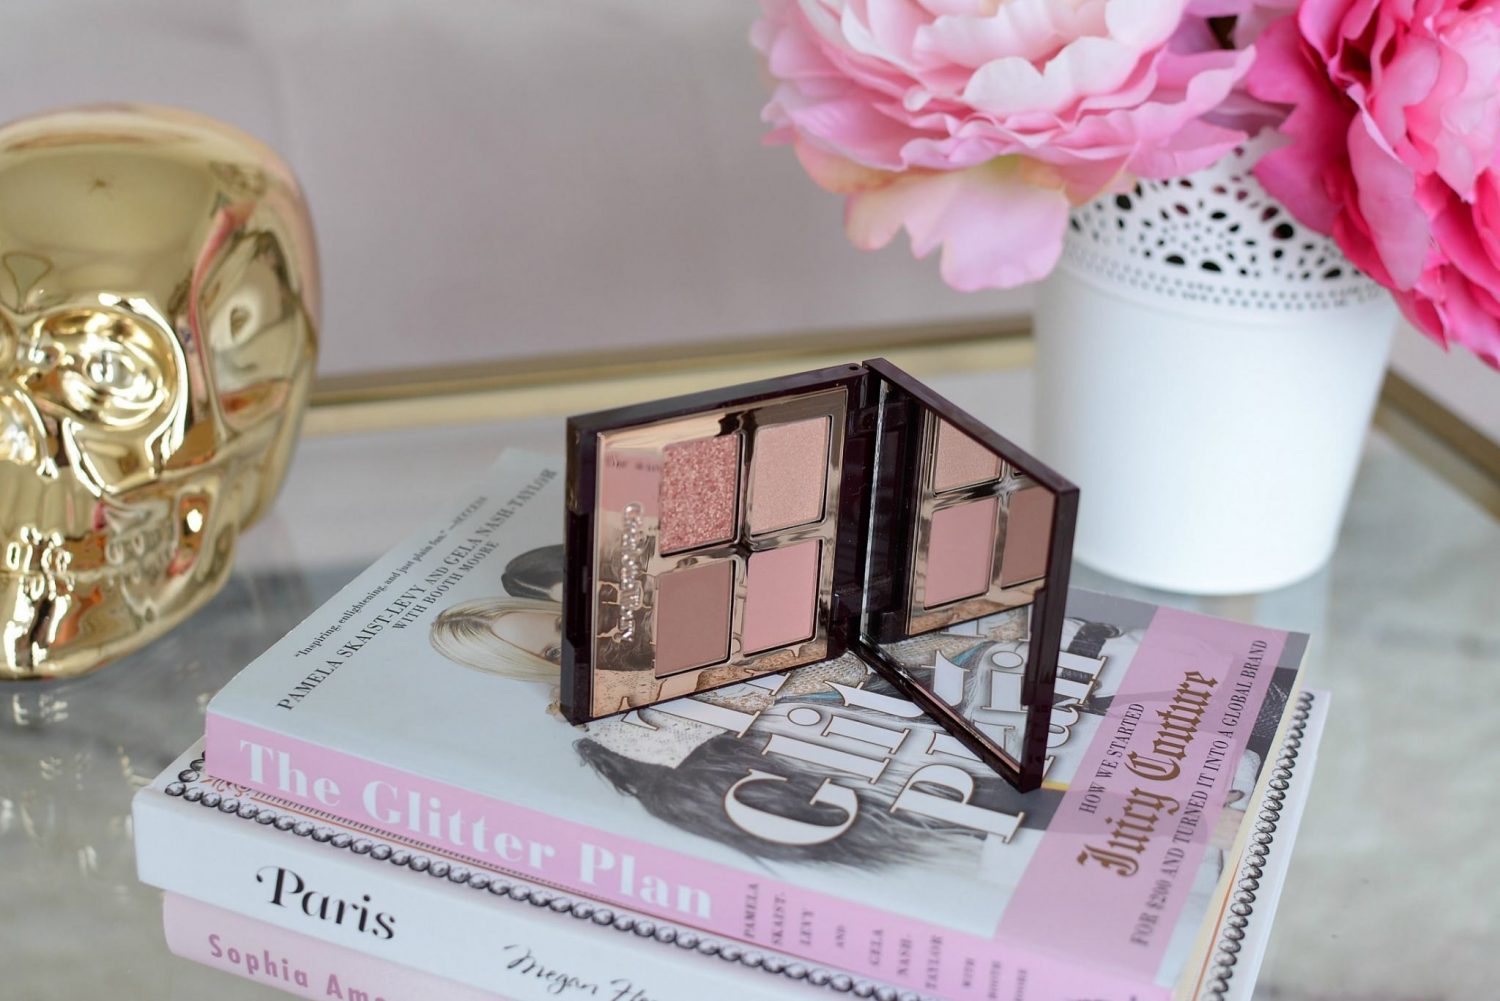 Charlotte Tilbury Luxury Palette Color-Coded Eyeshadow in Pillow Talk